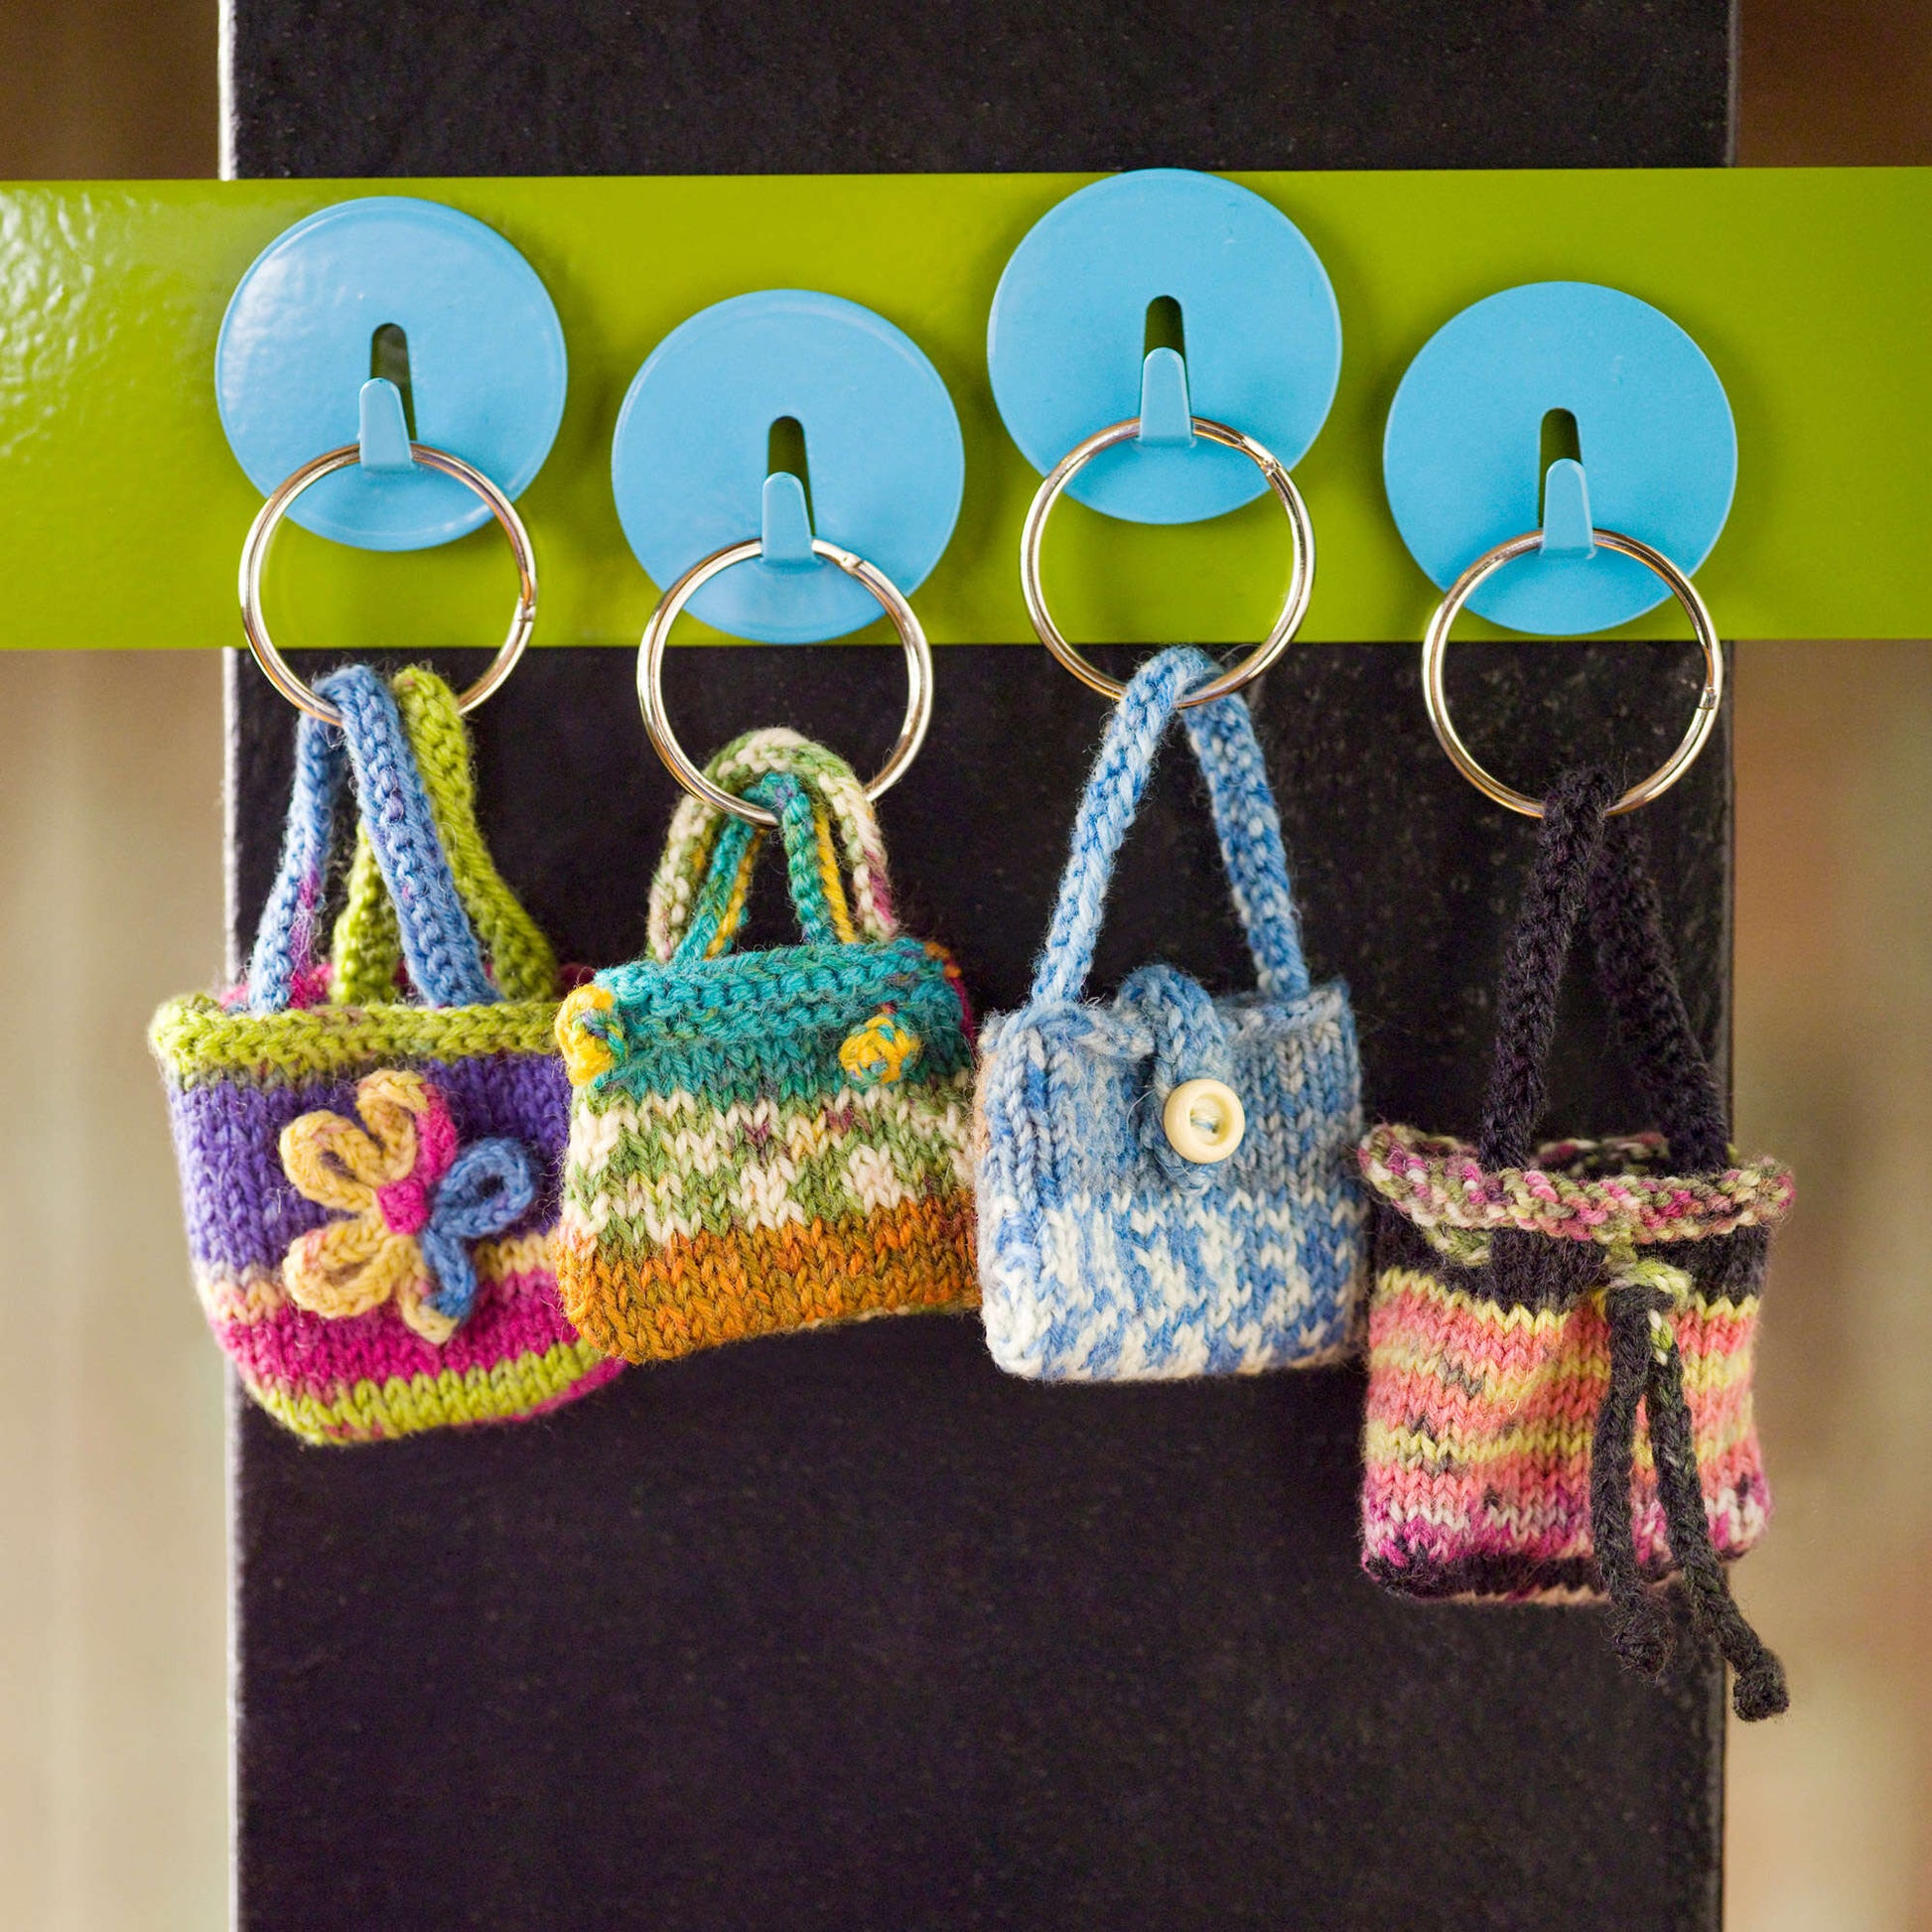 Ravelry: Animal Mini Purse Keychain pattern by Luqy And Mary